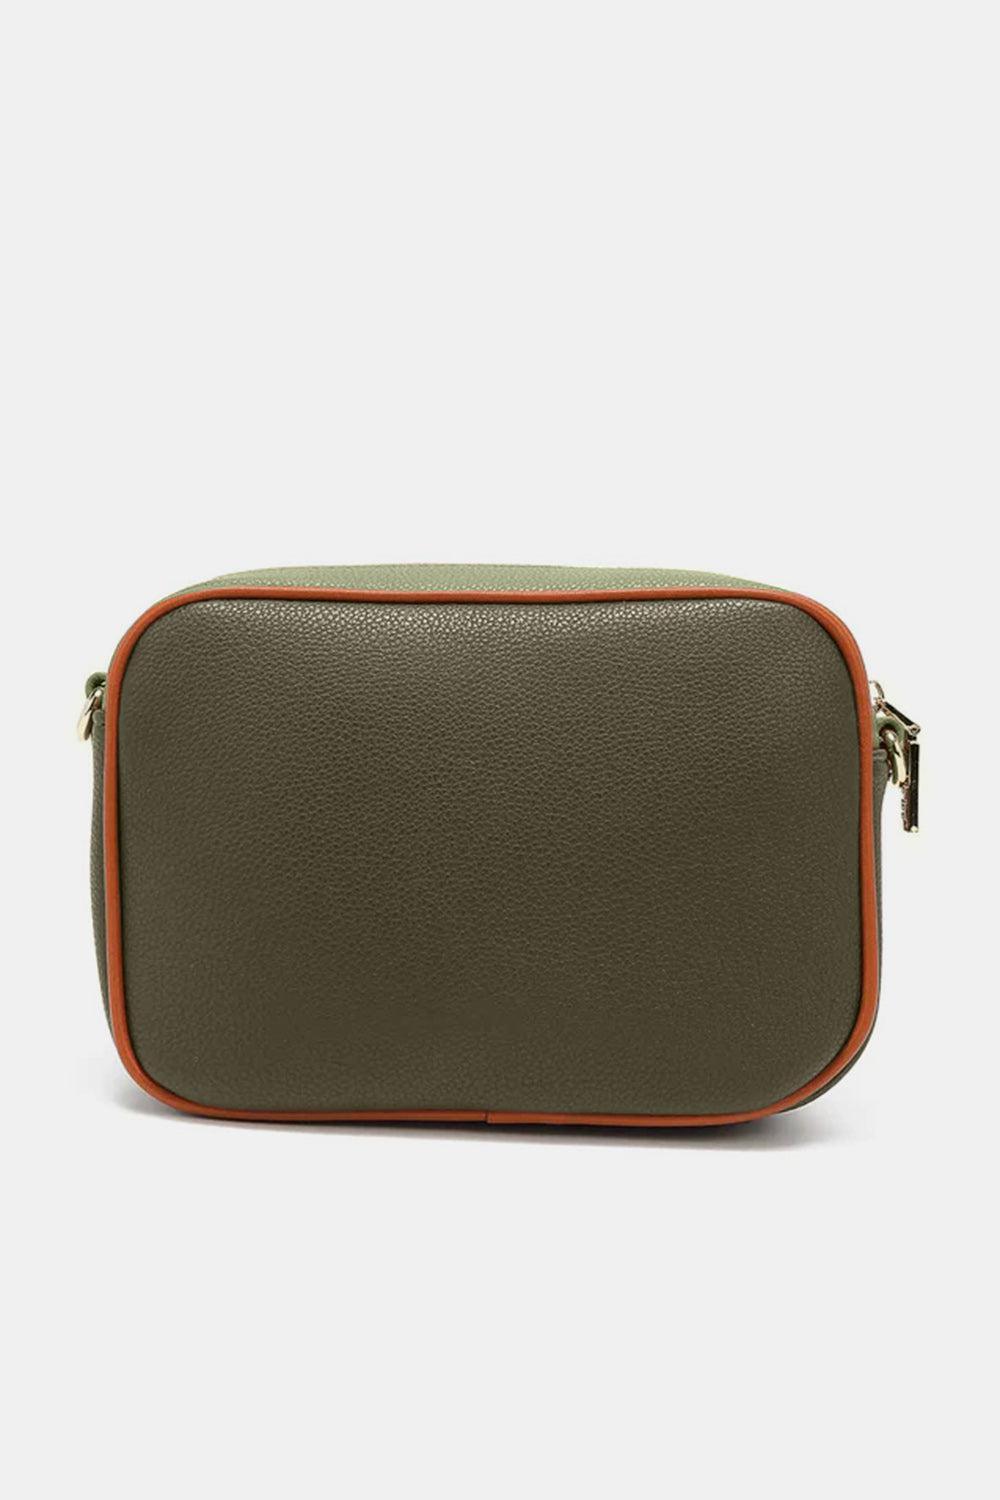 a green and orange leather case